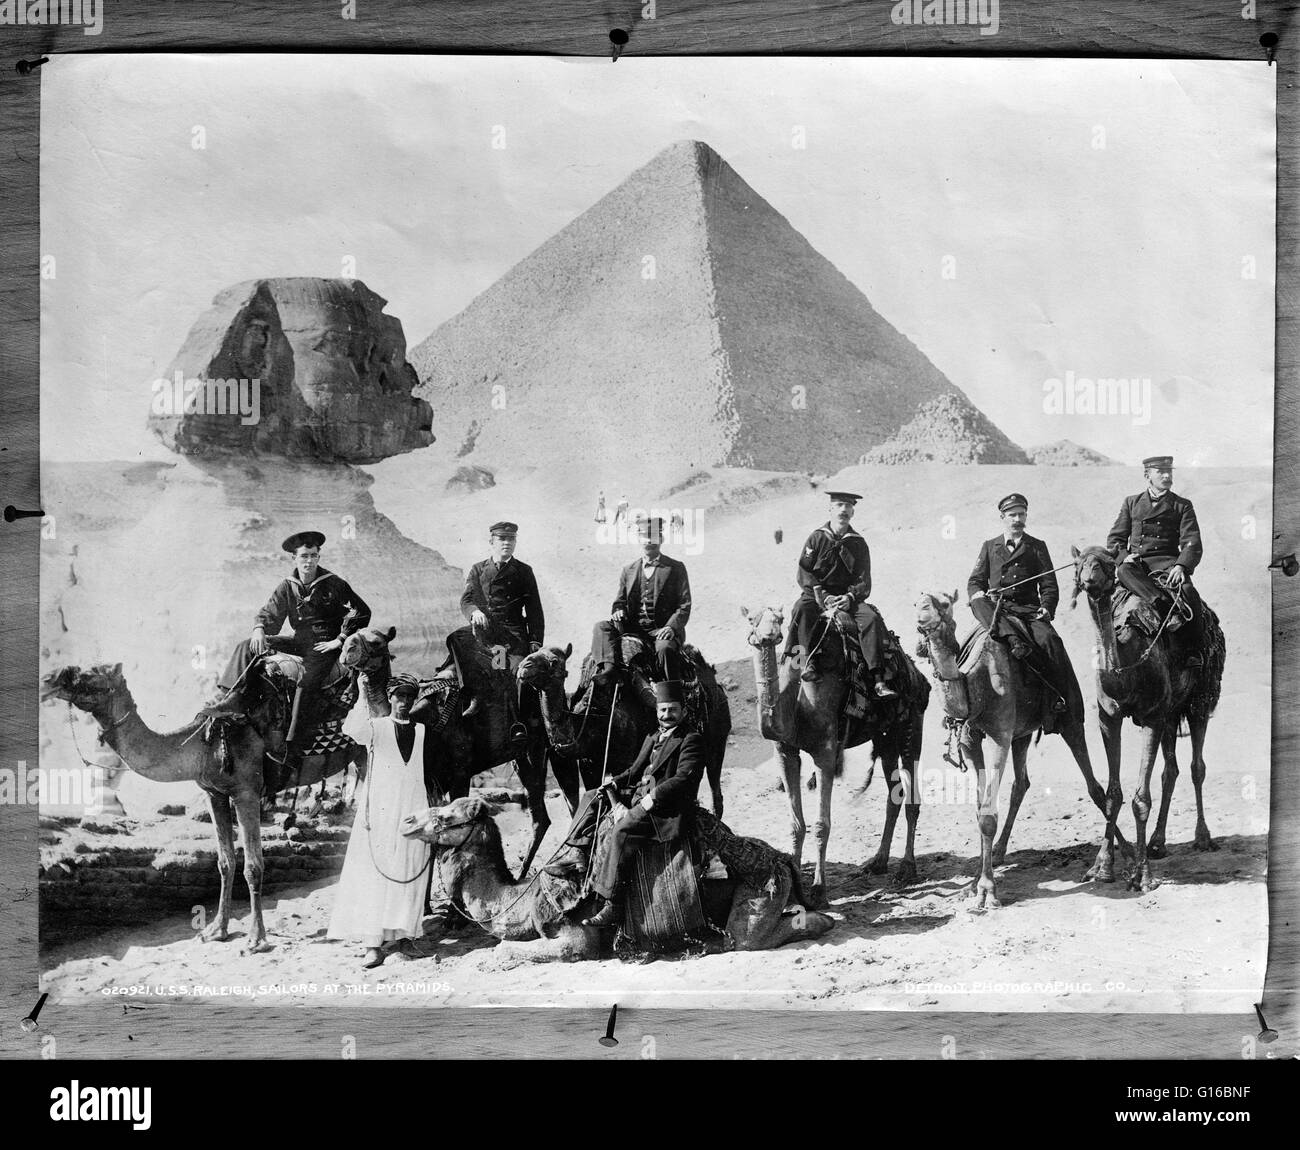 Entitled: 'U.S.S. Raleigh, sailors at the pyramids'. Photographed by the Detroit Publishing Company, circa 1897-1900. USS Raleigh (C-8) was a United States Navy protected cruiser commissioned in 1894 and in periodic service until 1919. In 1897 she reporte Stock Photo